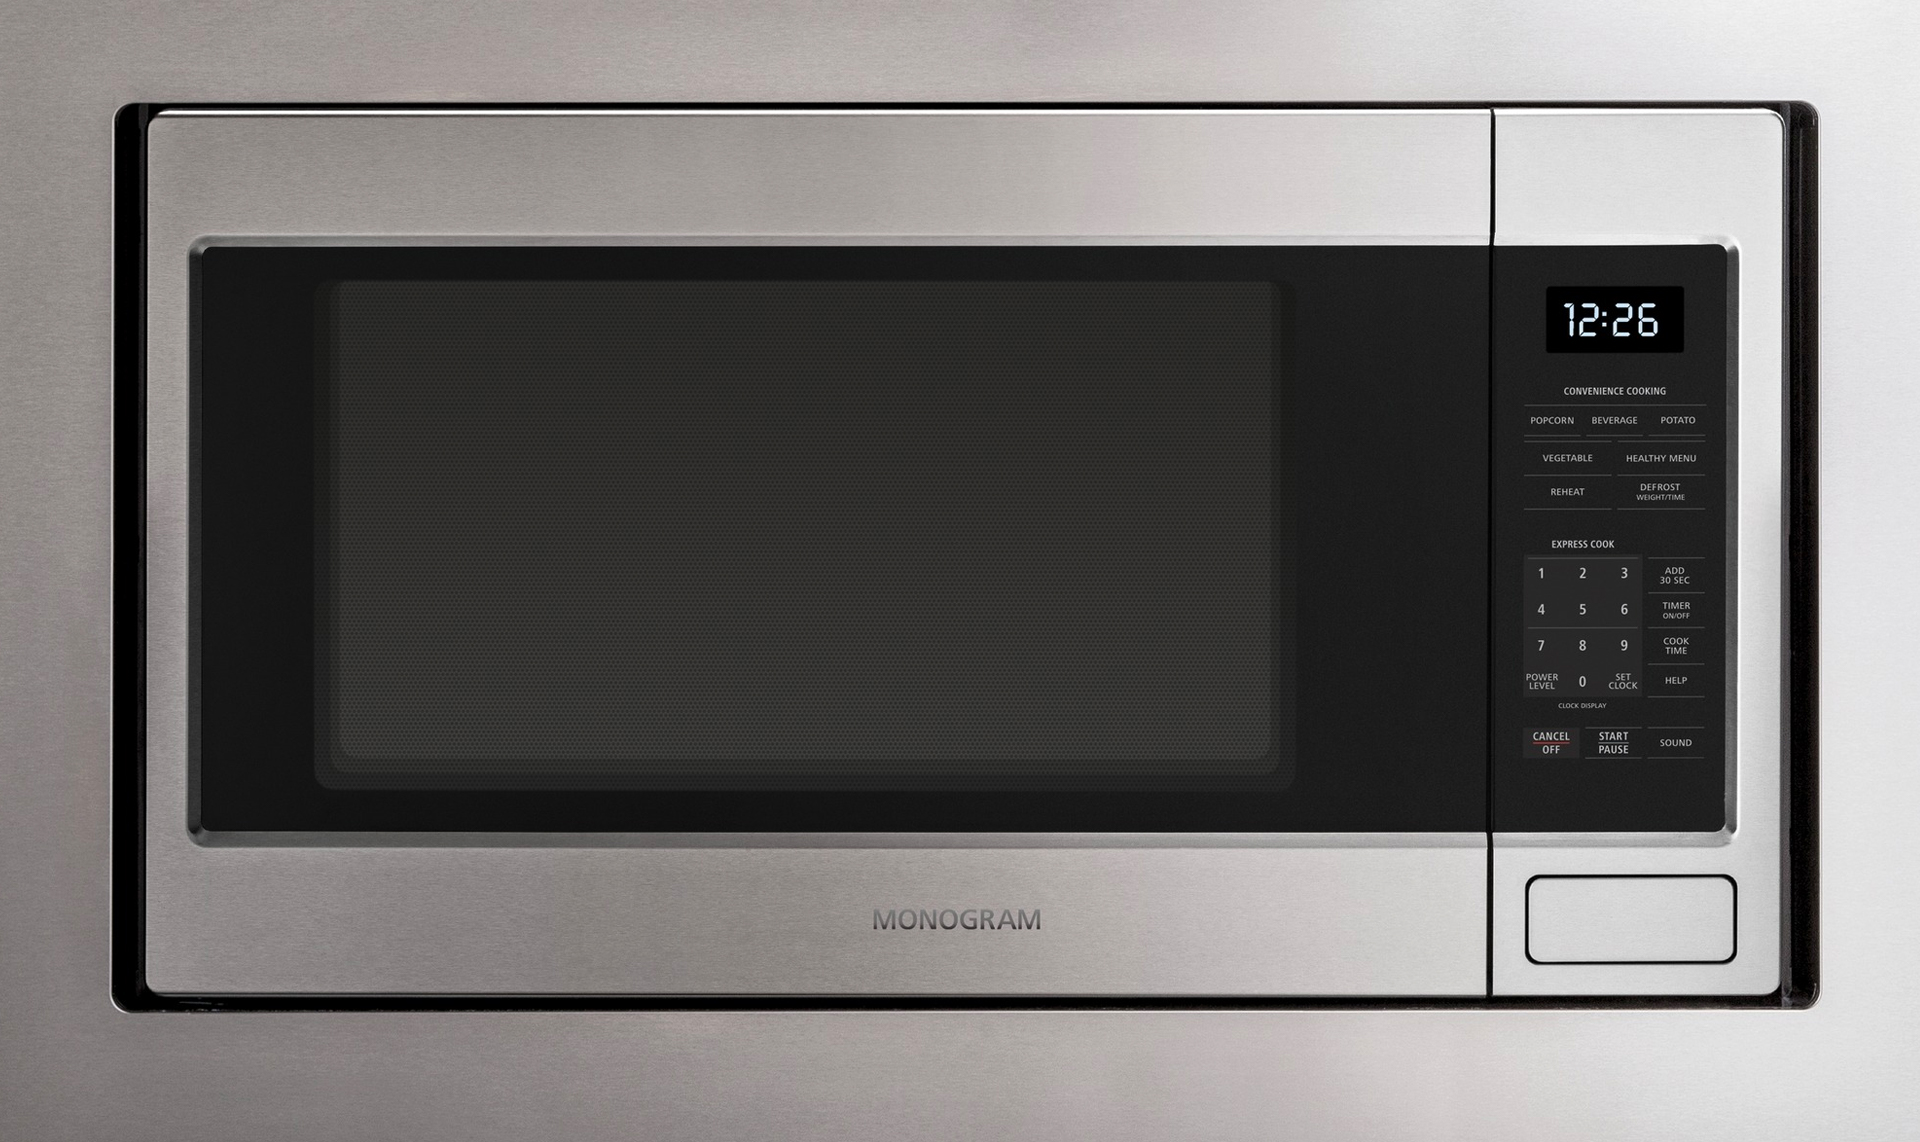 Built in & Countertop Microwave Ovens | Monogram Kitchens